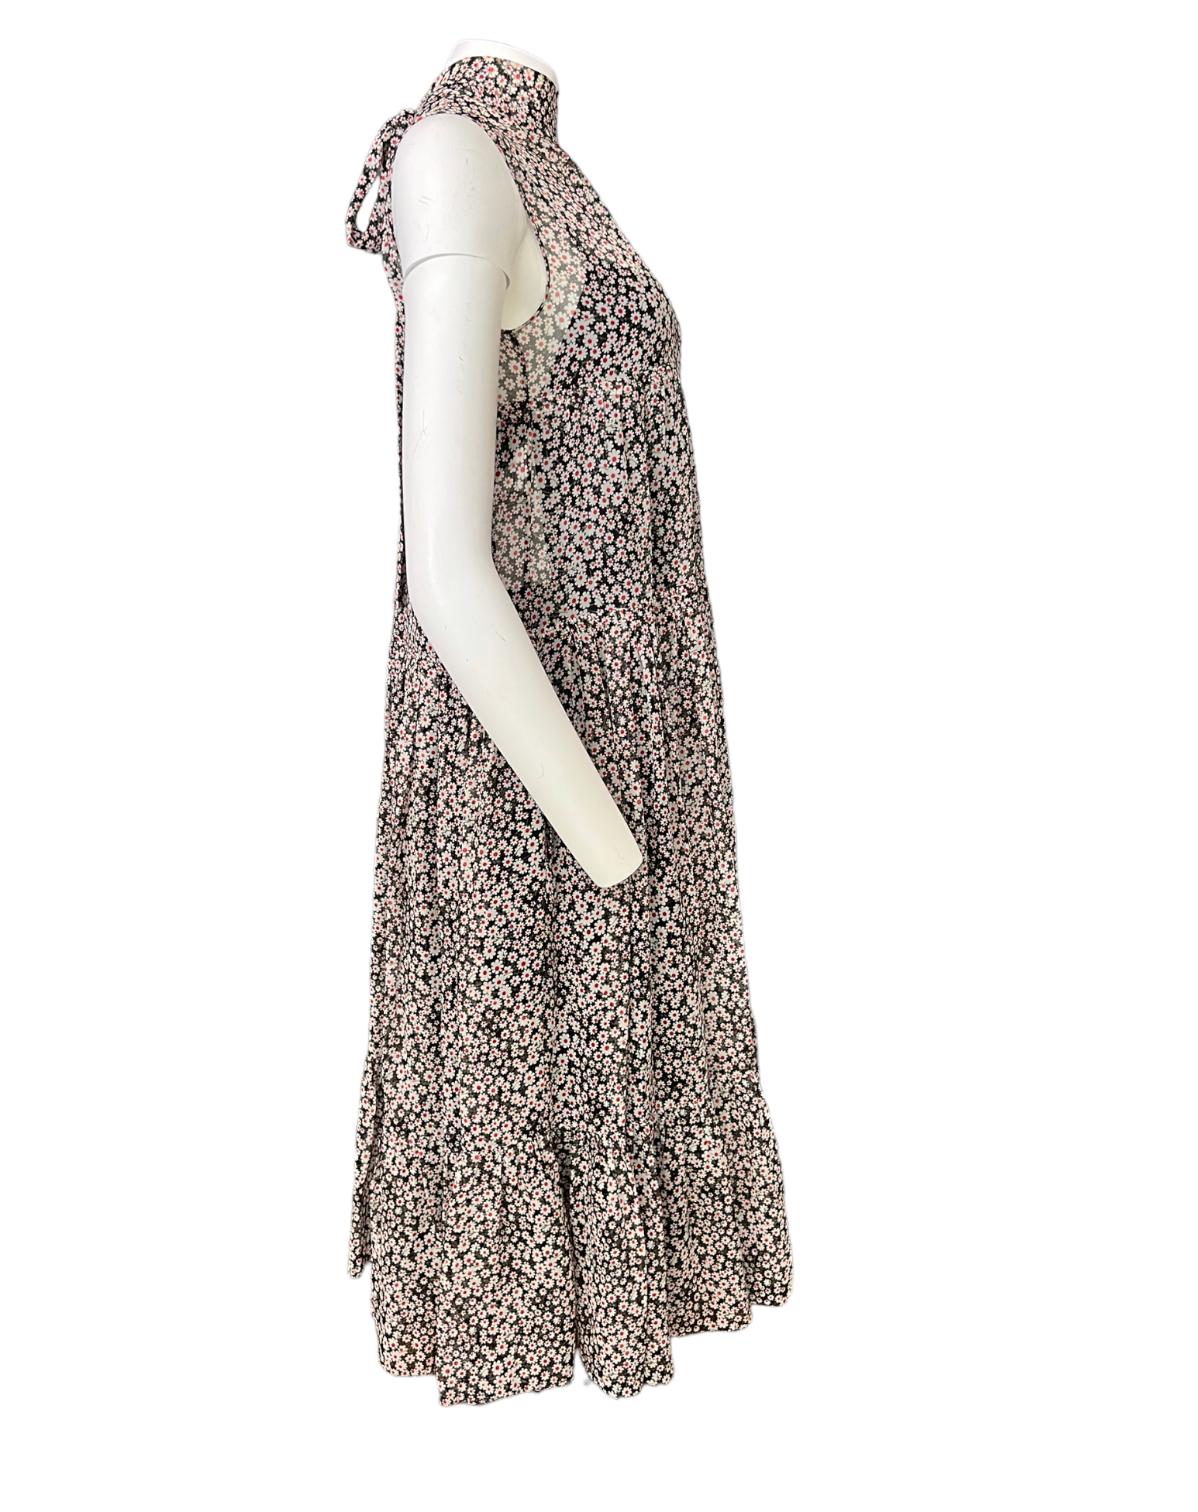 - Turtle neck
- Rear bow detail
- See through fabric
- Floral pattern
- Sleeveless
- Comes with black under dress
- Made in Italy 

